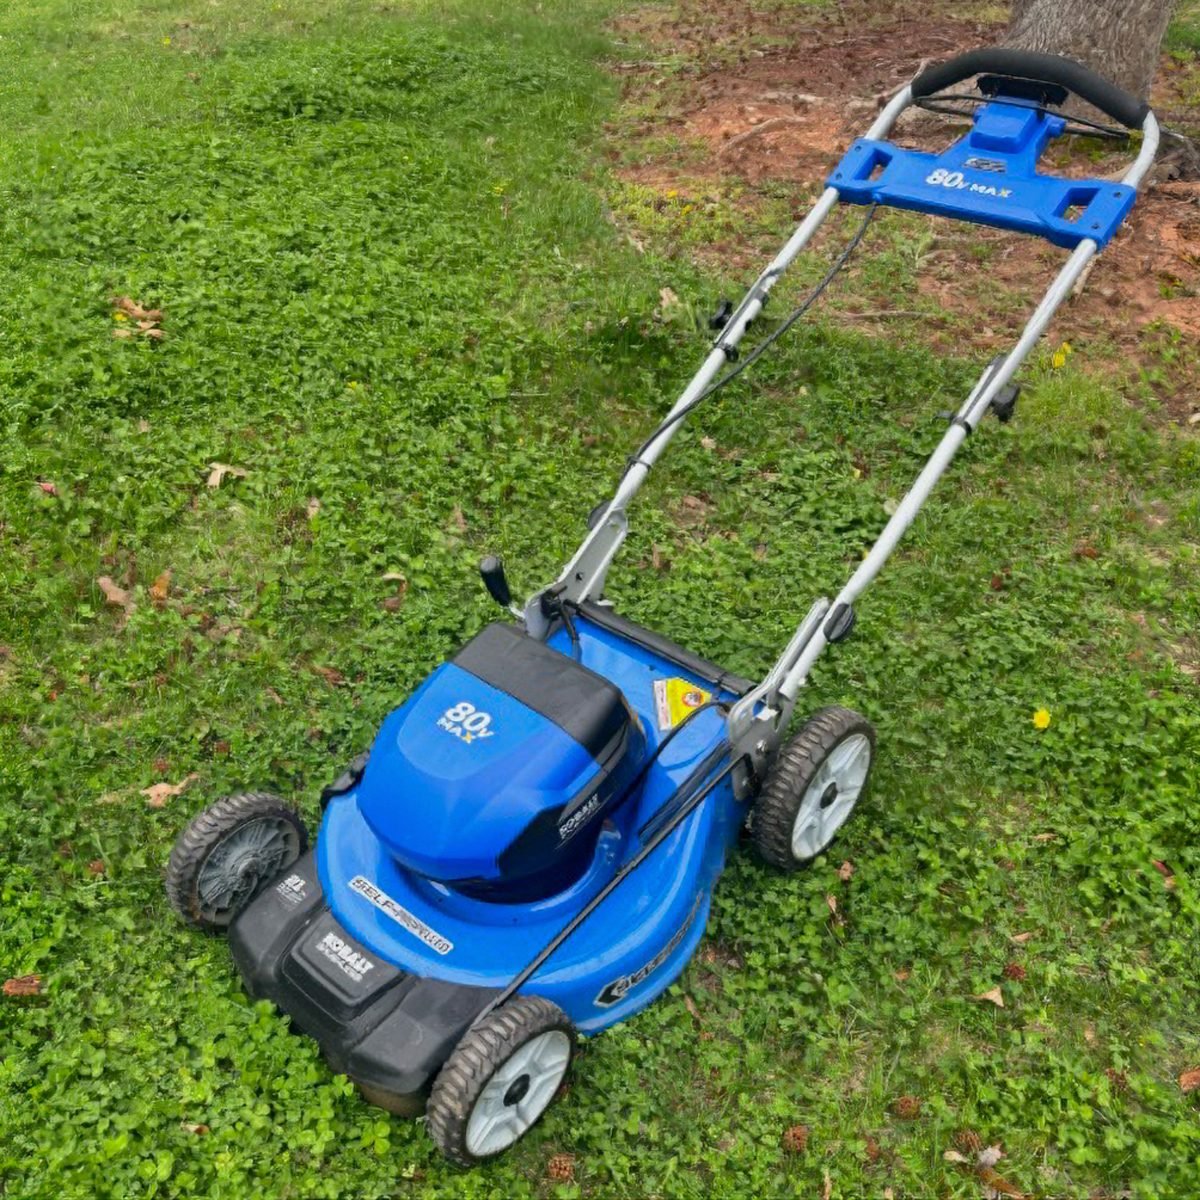 Kolbalt Electric Mower Review: Here's Why You Should Upgrade to this Self-Propelled Push Mower